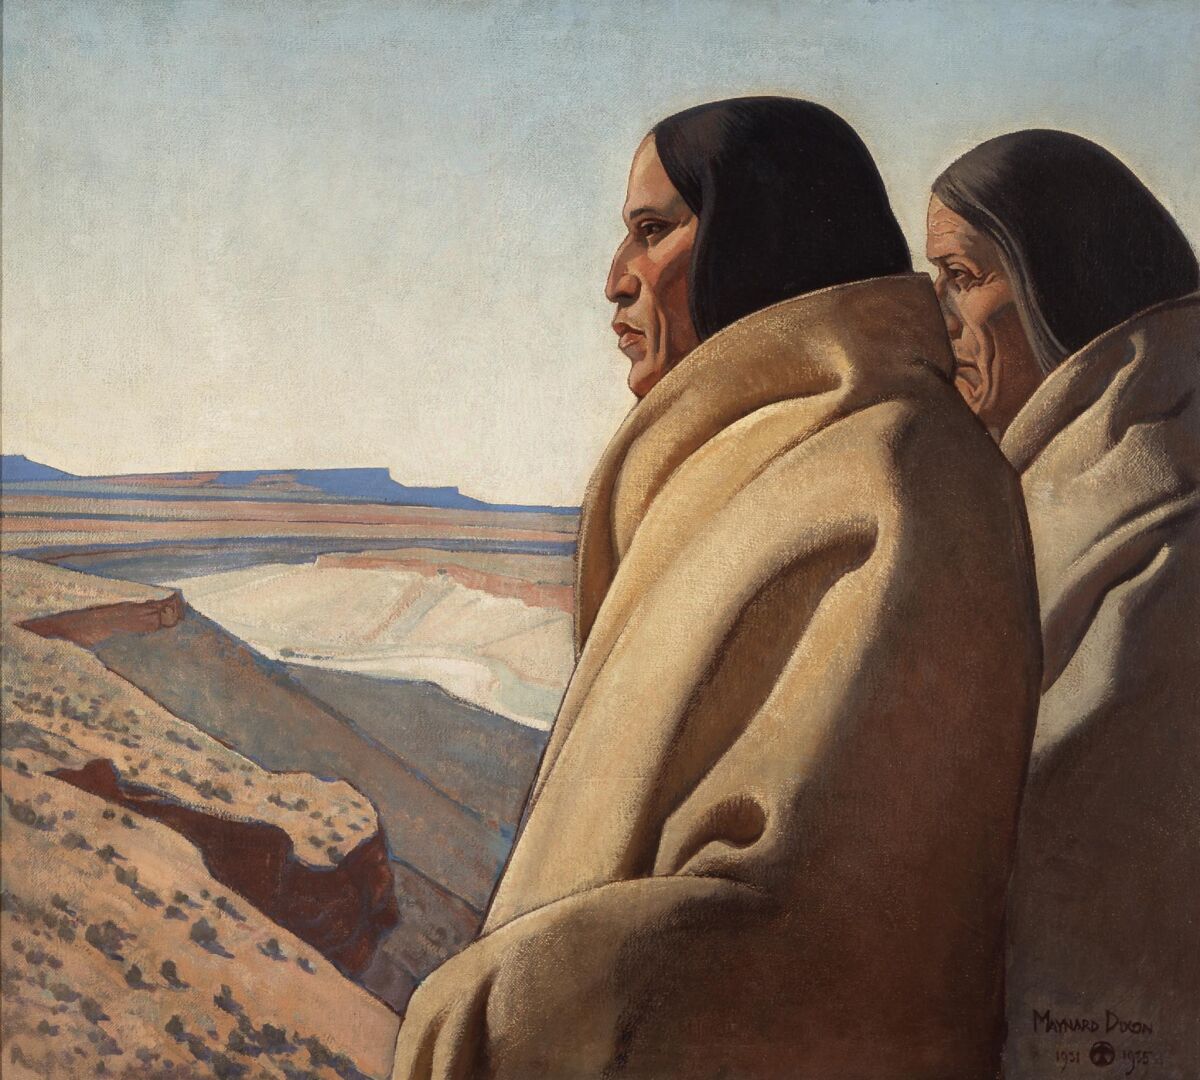 Maynard Dixon's 1931-32 canvas, "Men of the Red Earth."